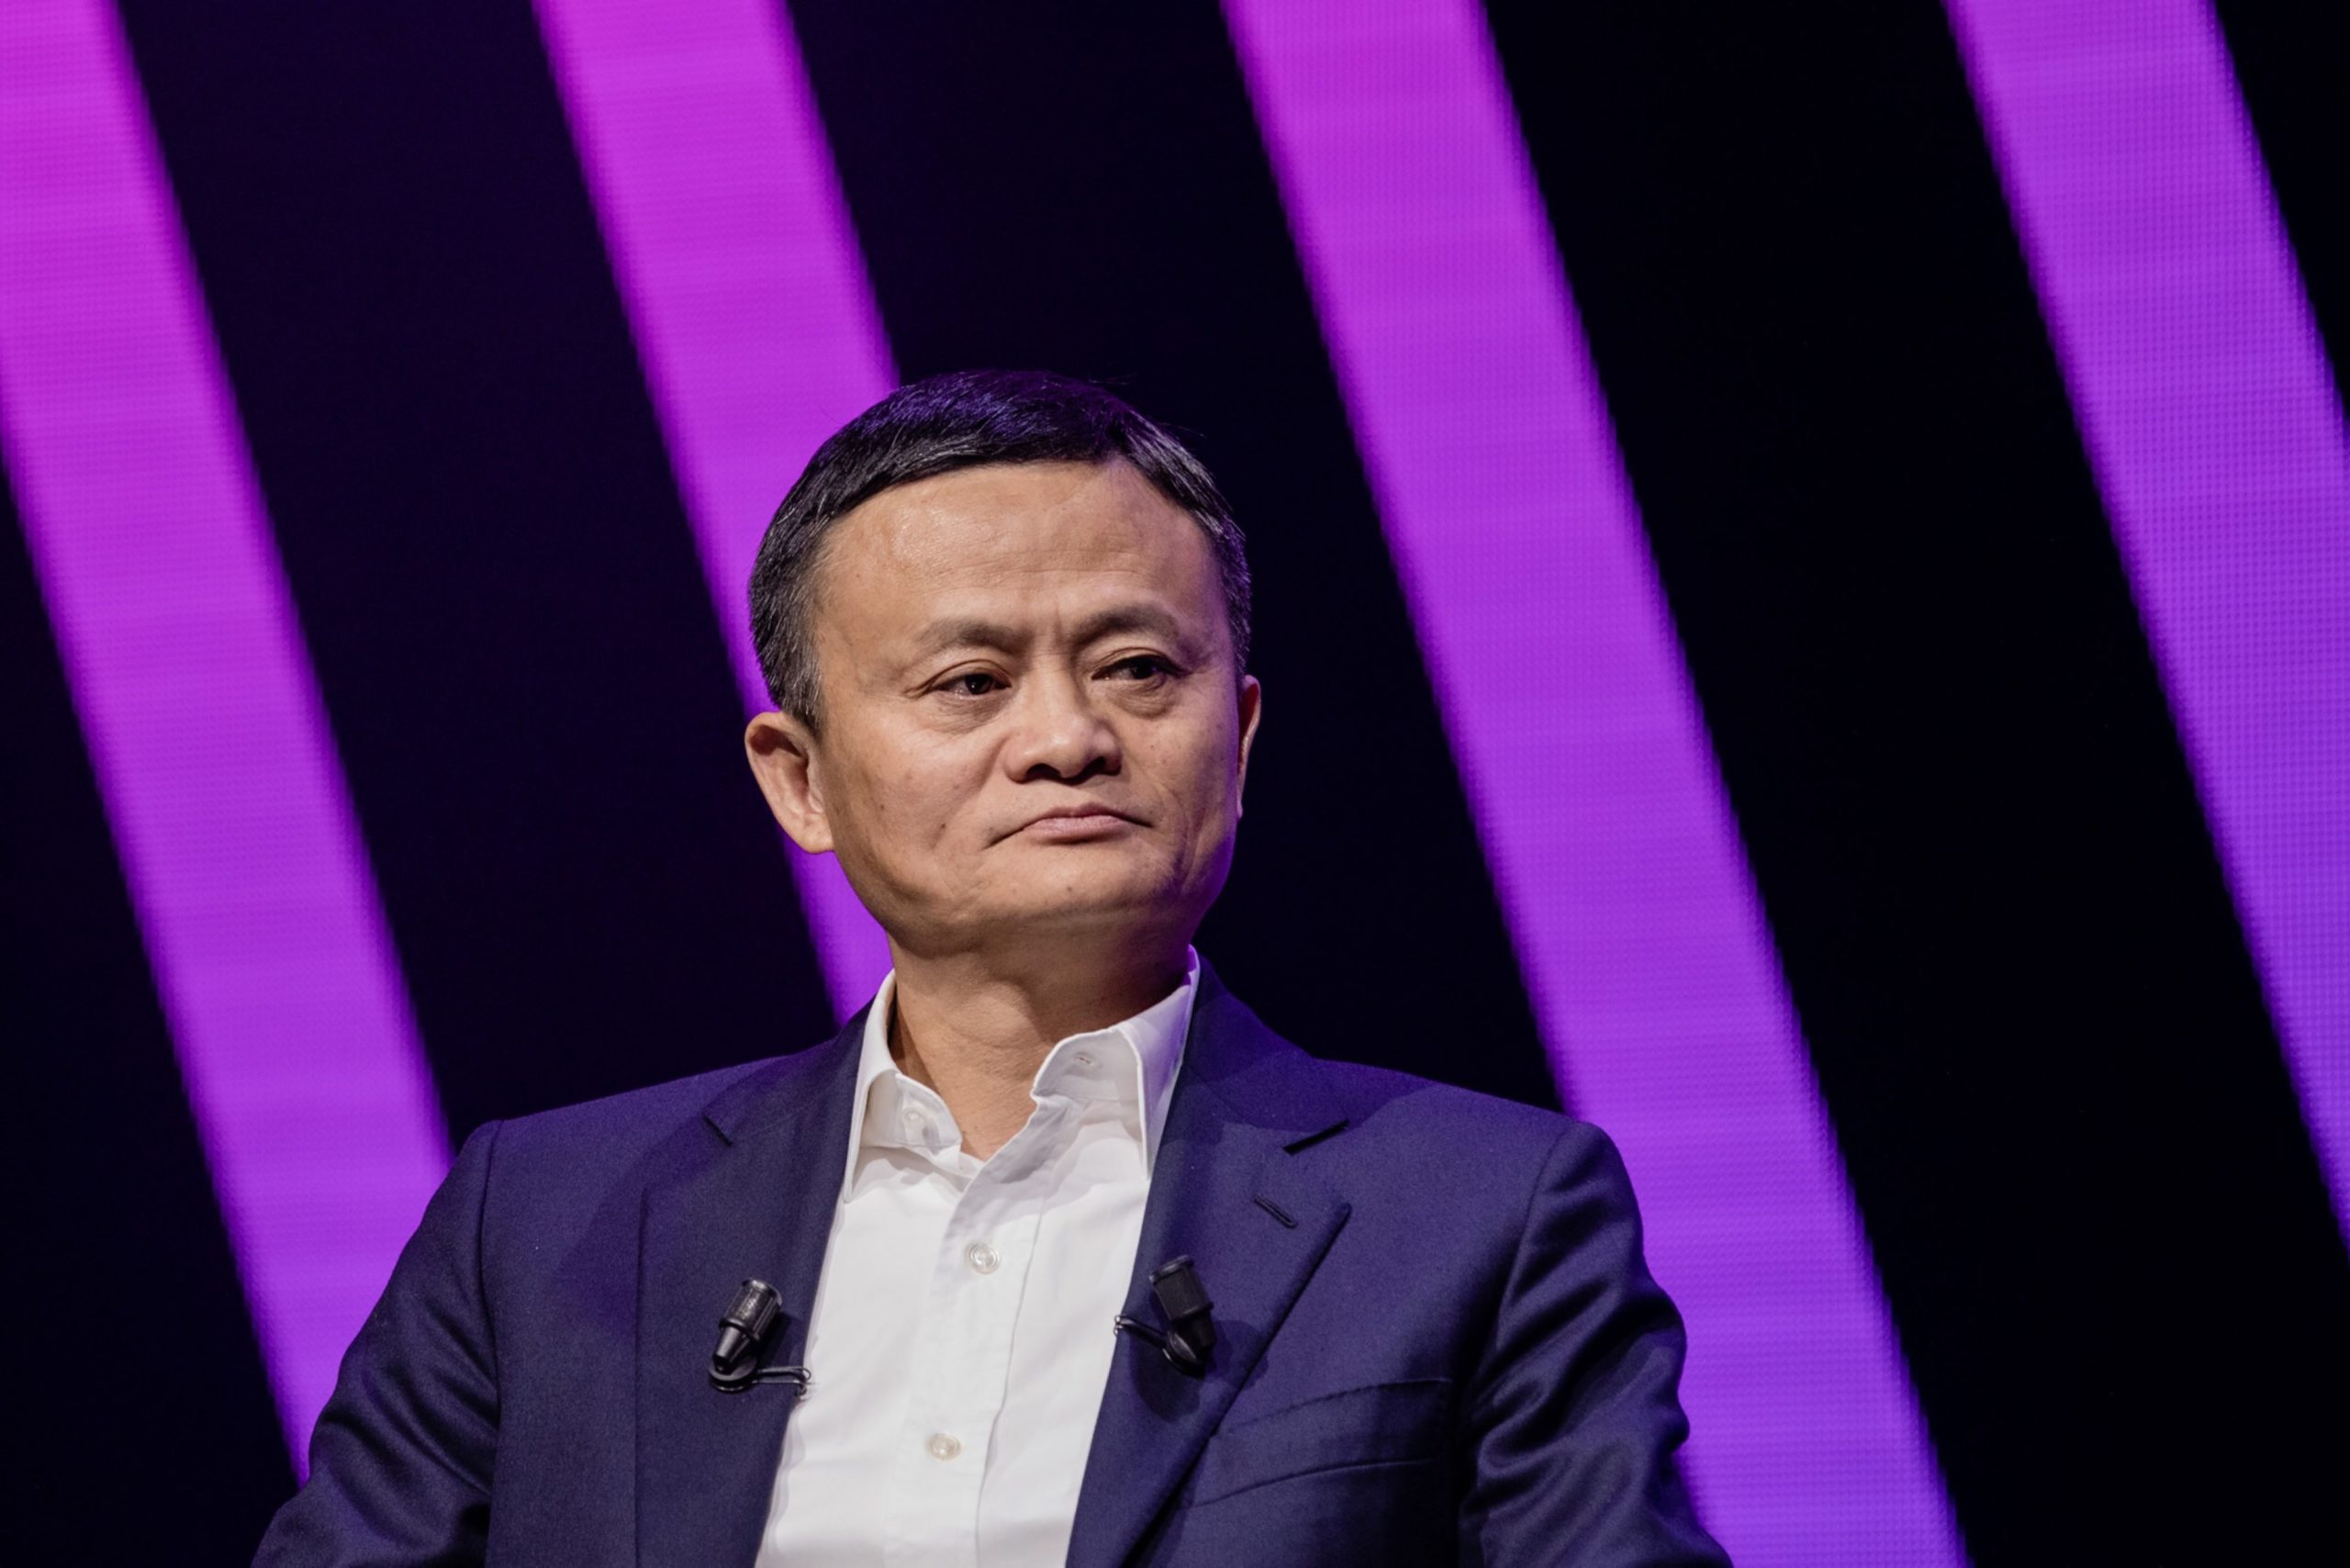 Jack Ma, chairman of Alibaba Group Holding Ltd., pauses during a fireside interview at the Viva Technology conference in Paris, France, on Thursday, May 16, 2019. Donald Trumps latest offensive against Chinas Huawei Technologies Co. puts Europe in an even bigger bind over which side to pick, but France's President Emmanuel Macron is holding the line.